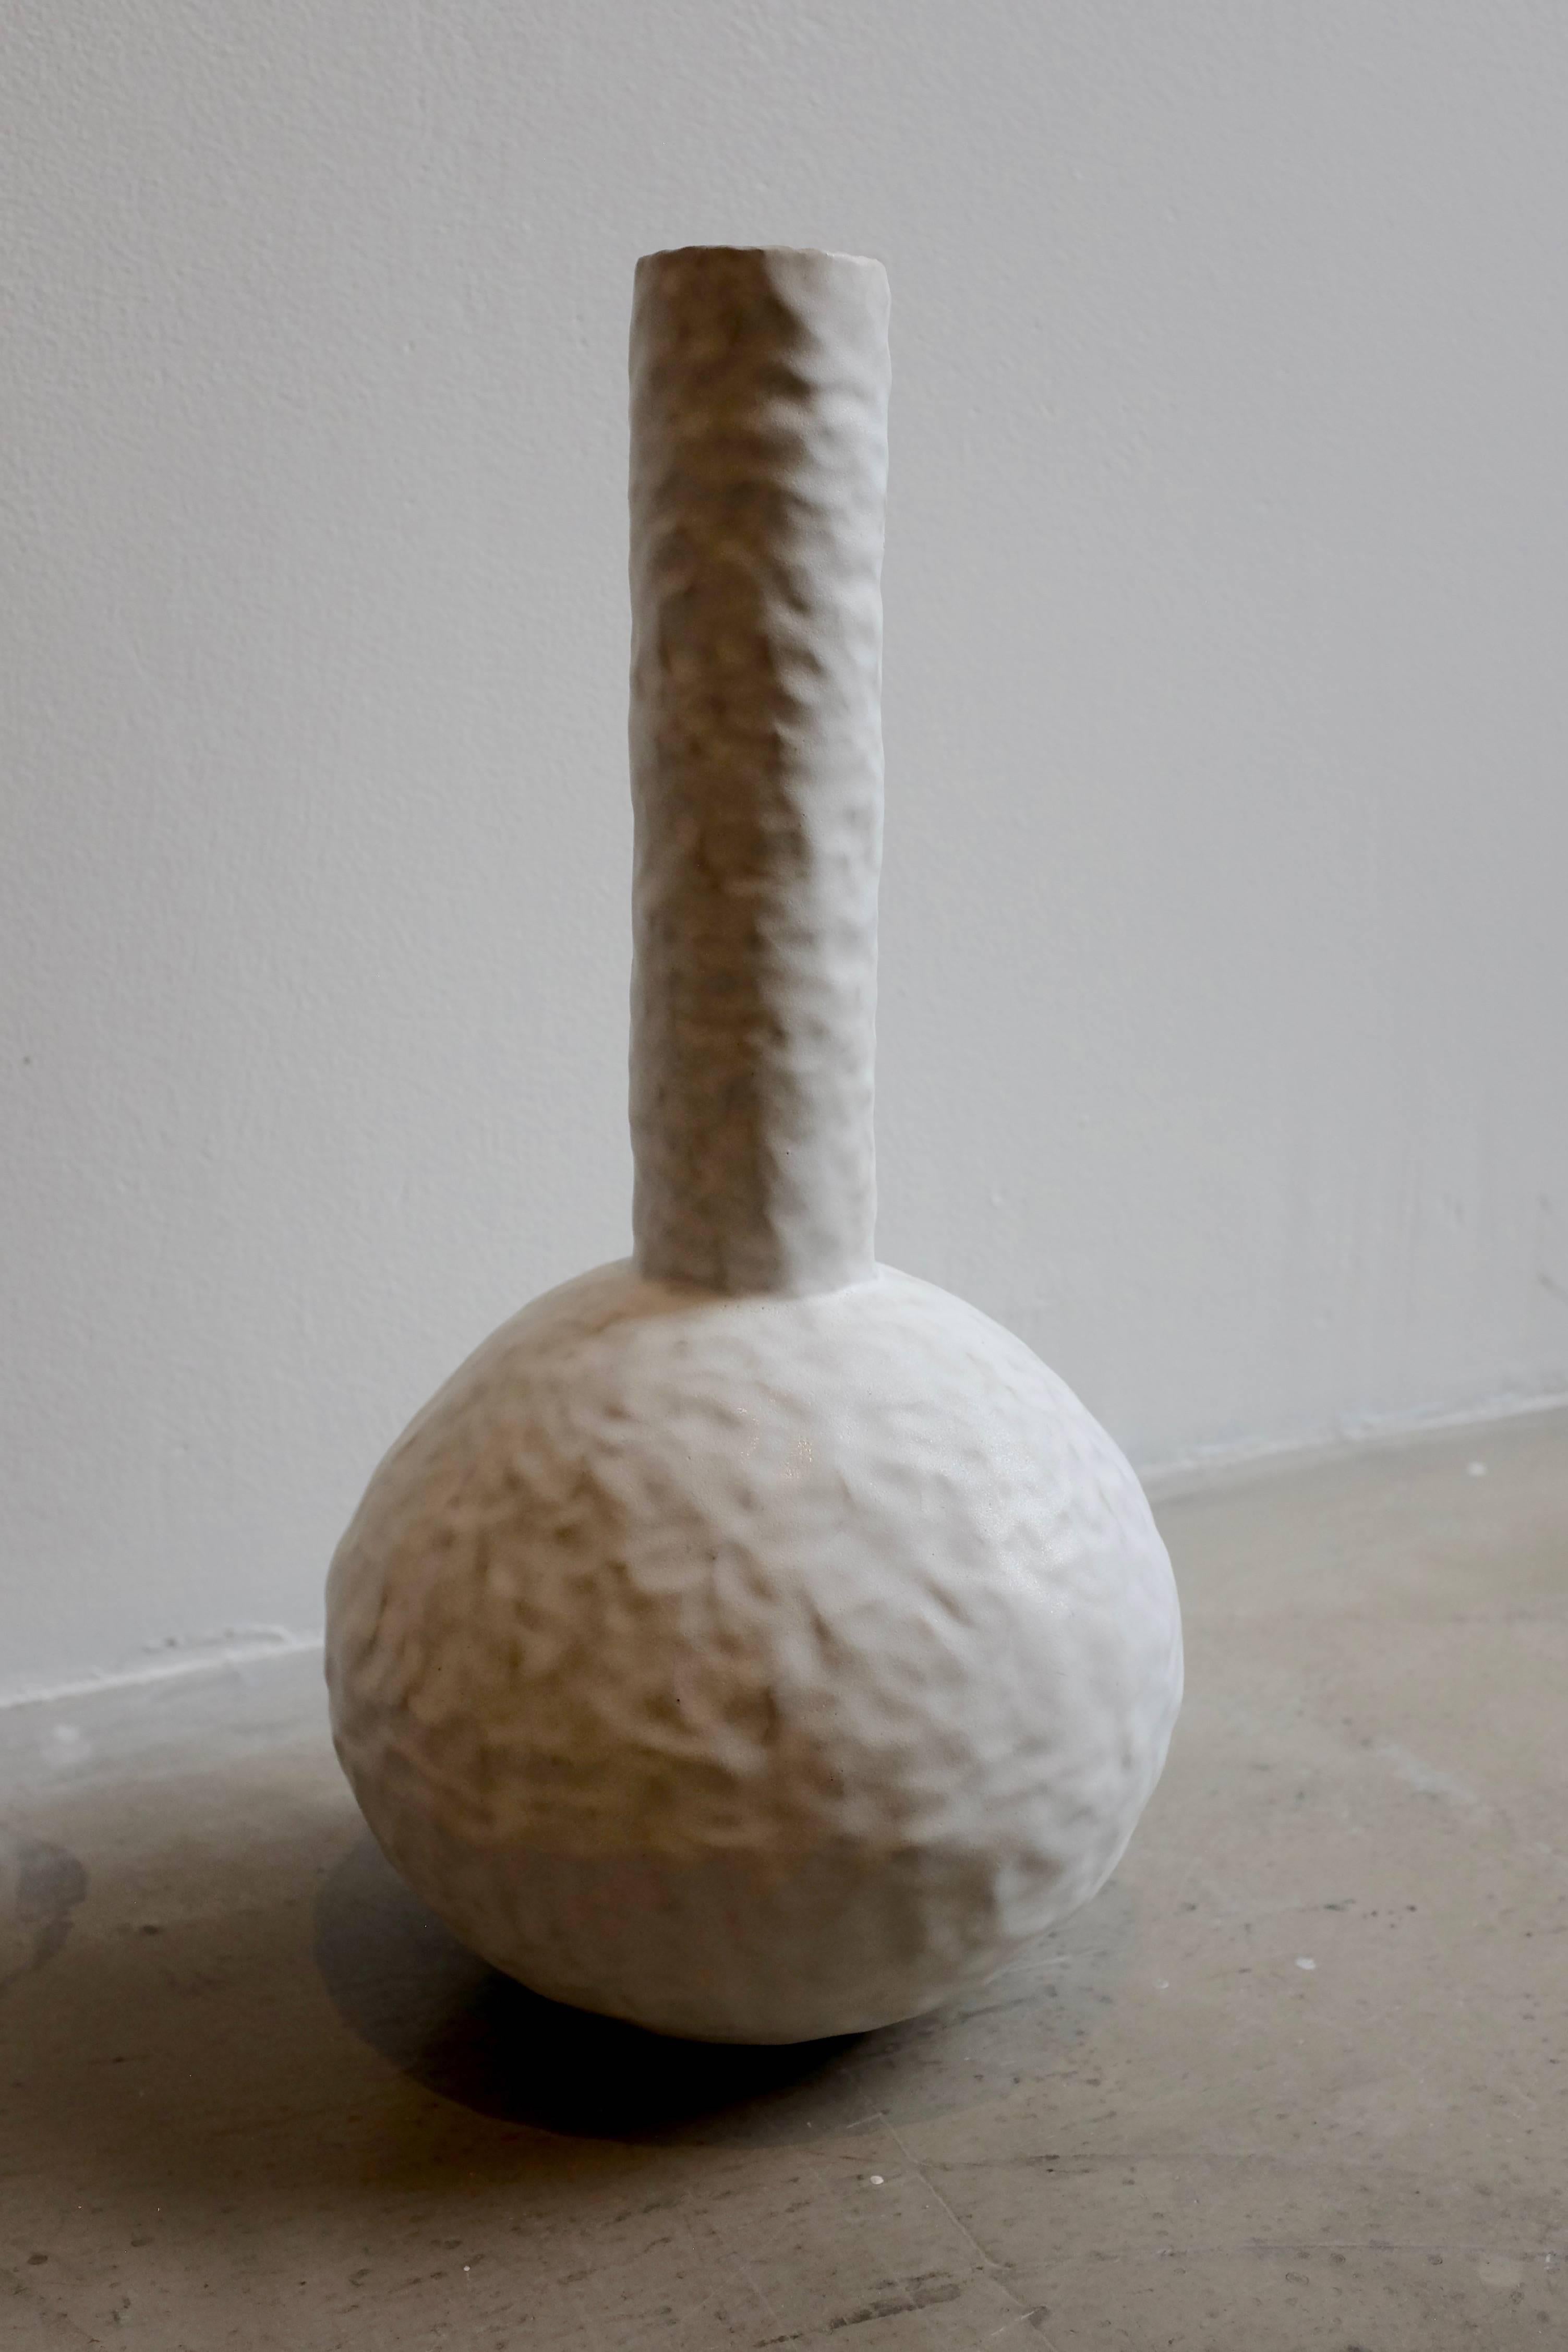 This form focused piece is constructed in stoneware using a coiling and pinching technique; the slight depressions and textures on the vases surfaces are created by the artist's fingers. Each piece is hand-sculpted and designed to create